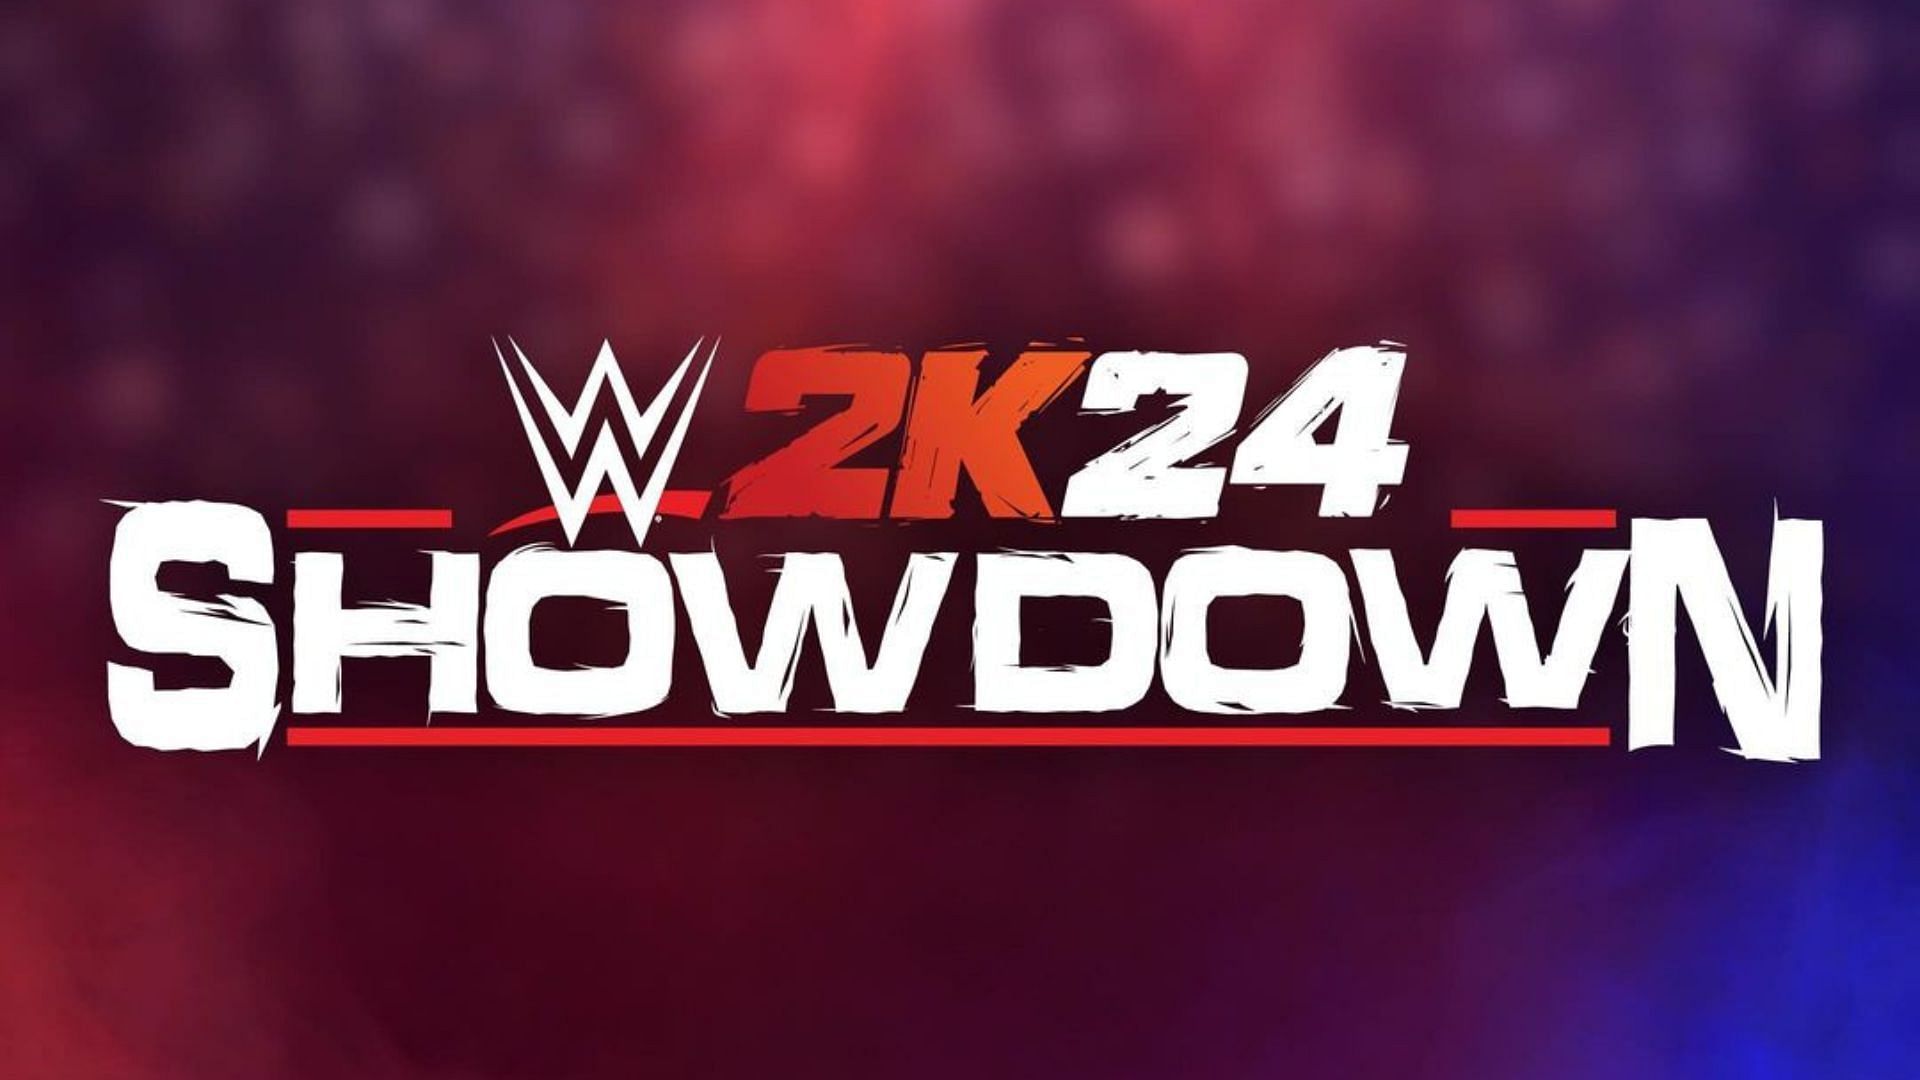 WWE 2K Showdown is sure to be exciting